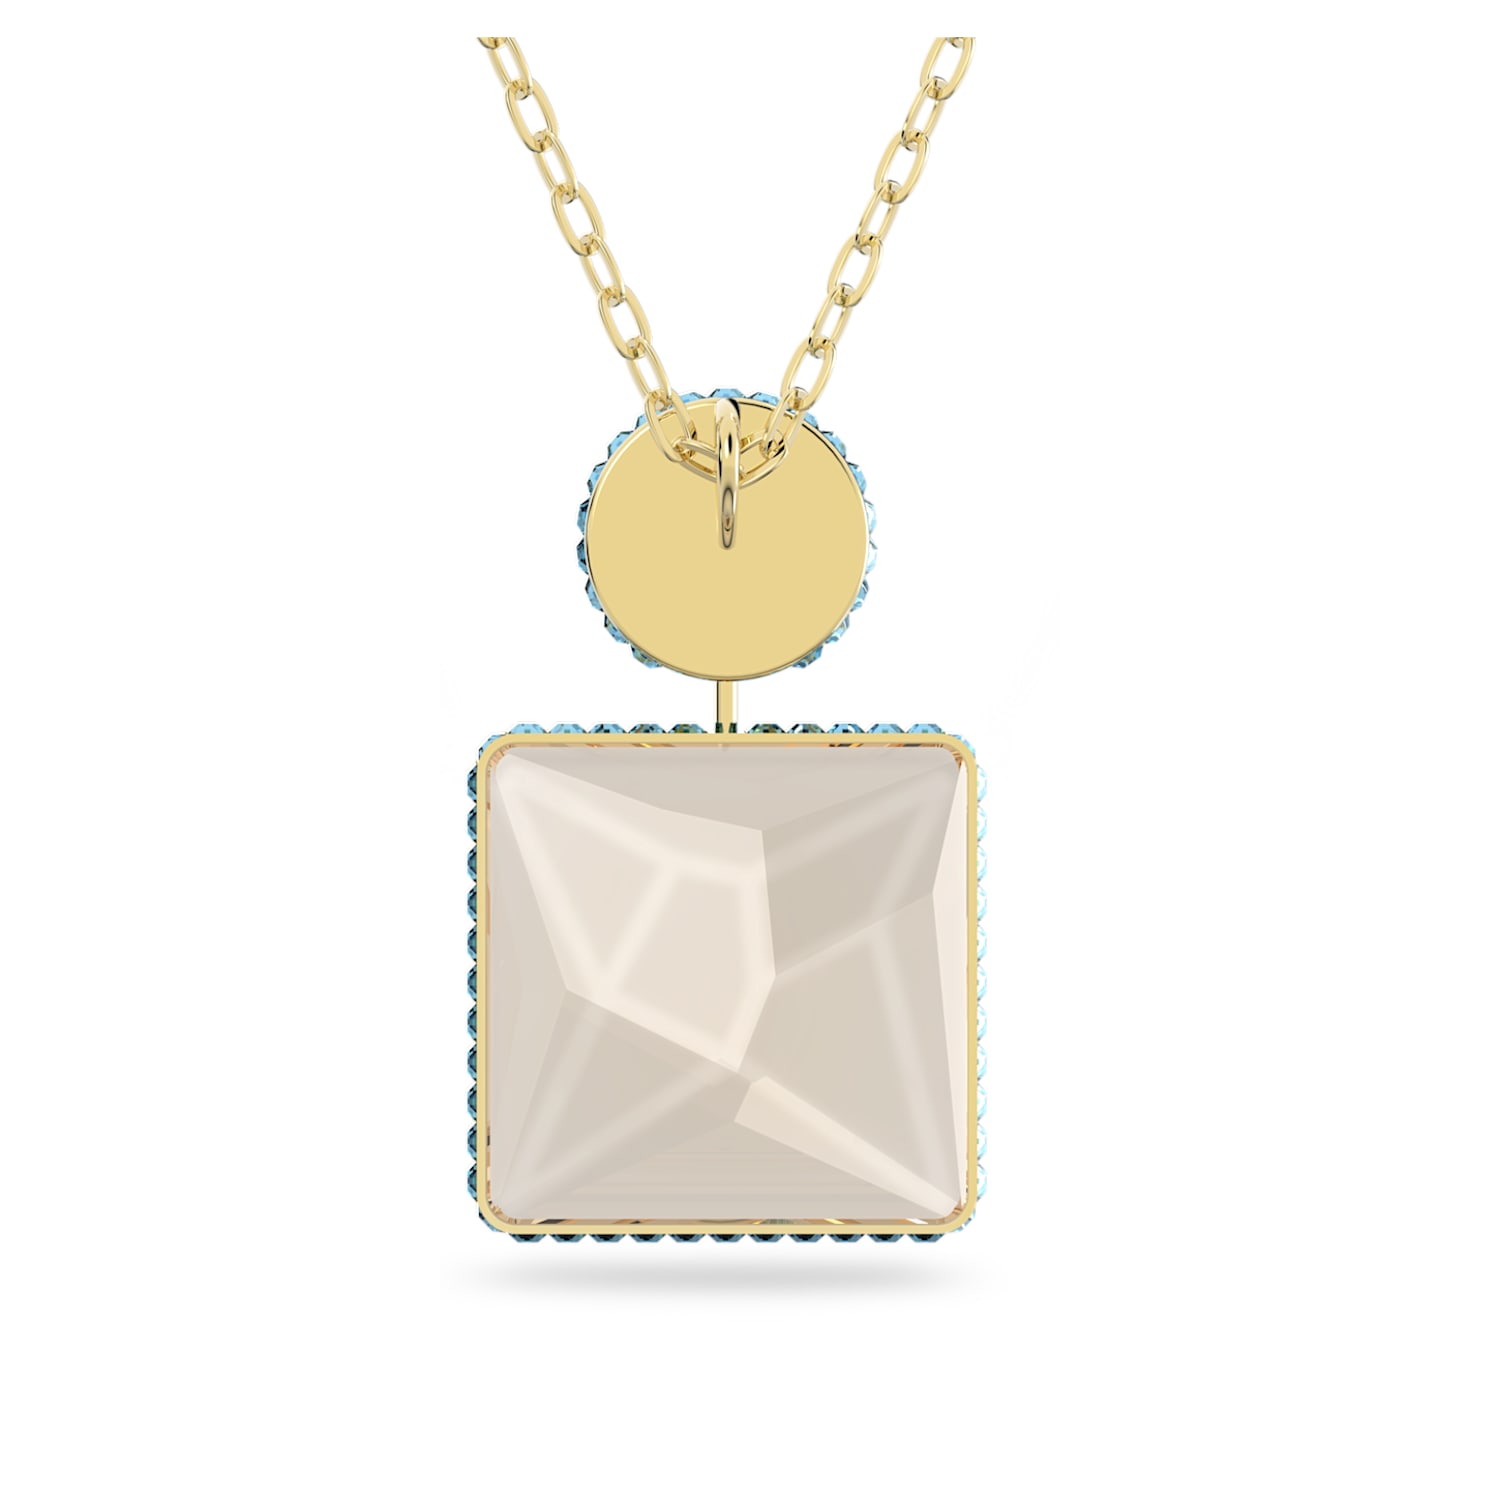 Orbita necklace, Square cut, Yellow, Gold-tone plated